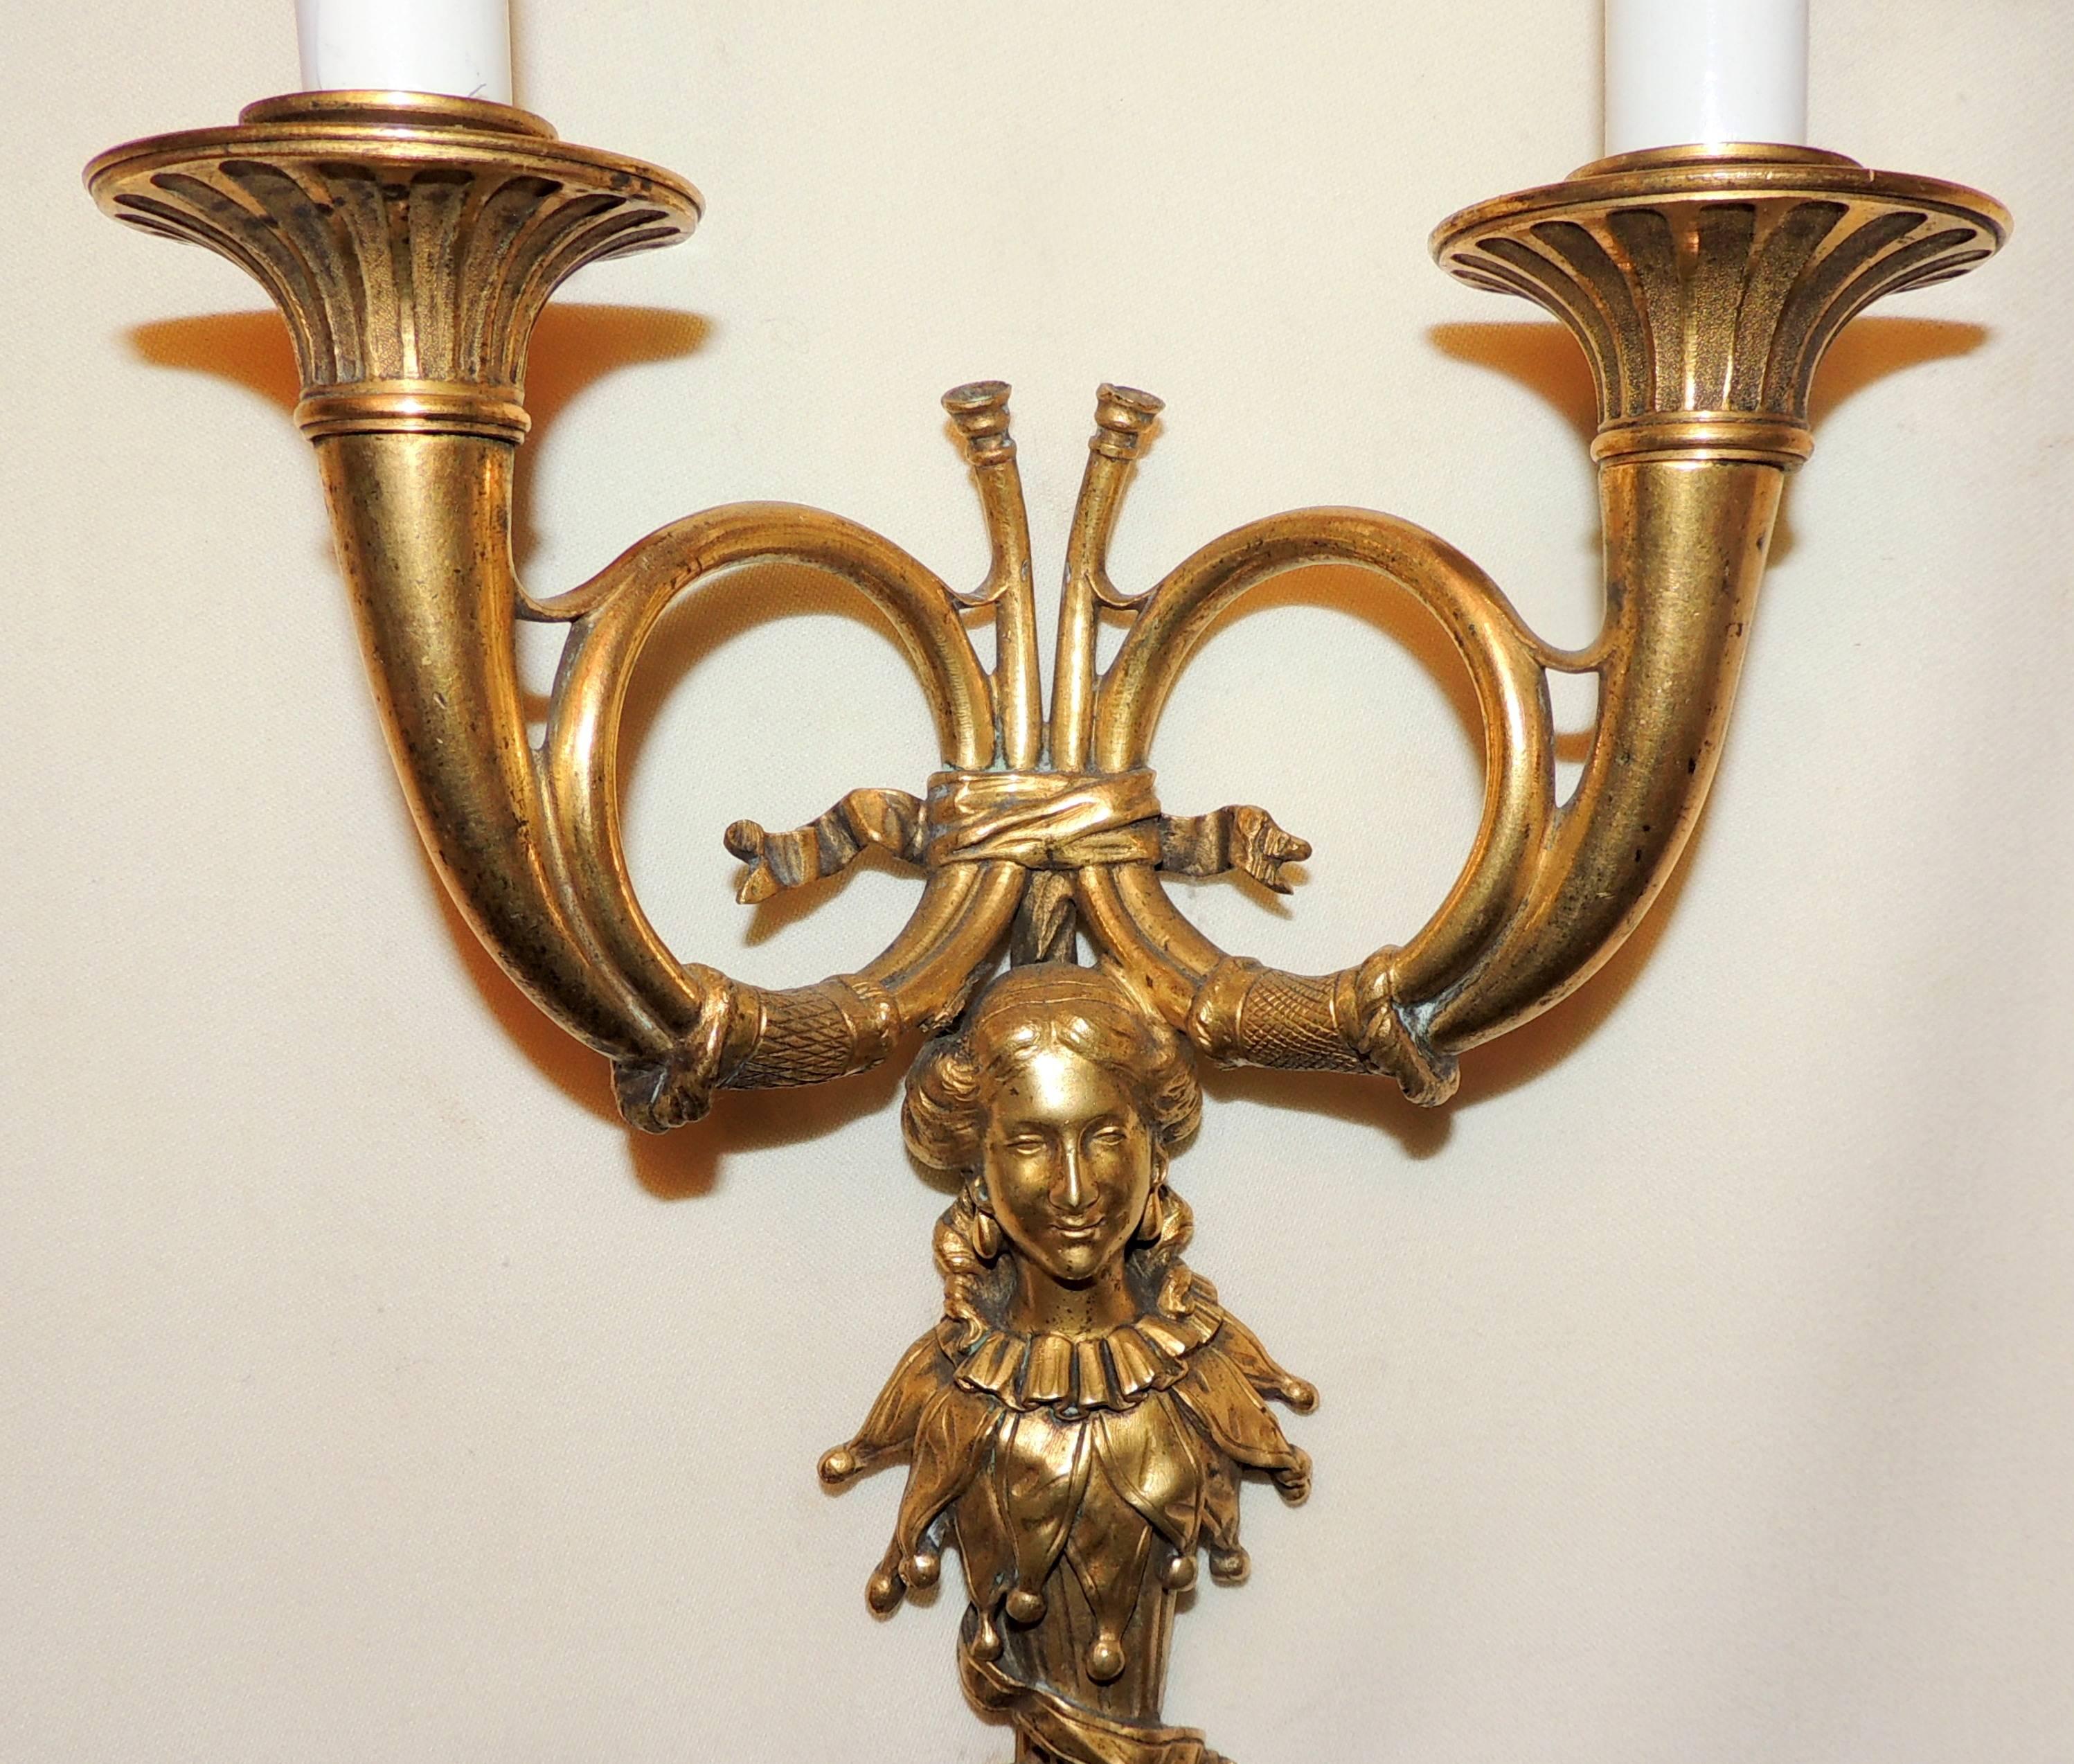 A wonderful pair of French horn Doré bronze lady figural two light tasle regency wall sconces.